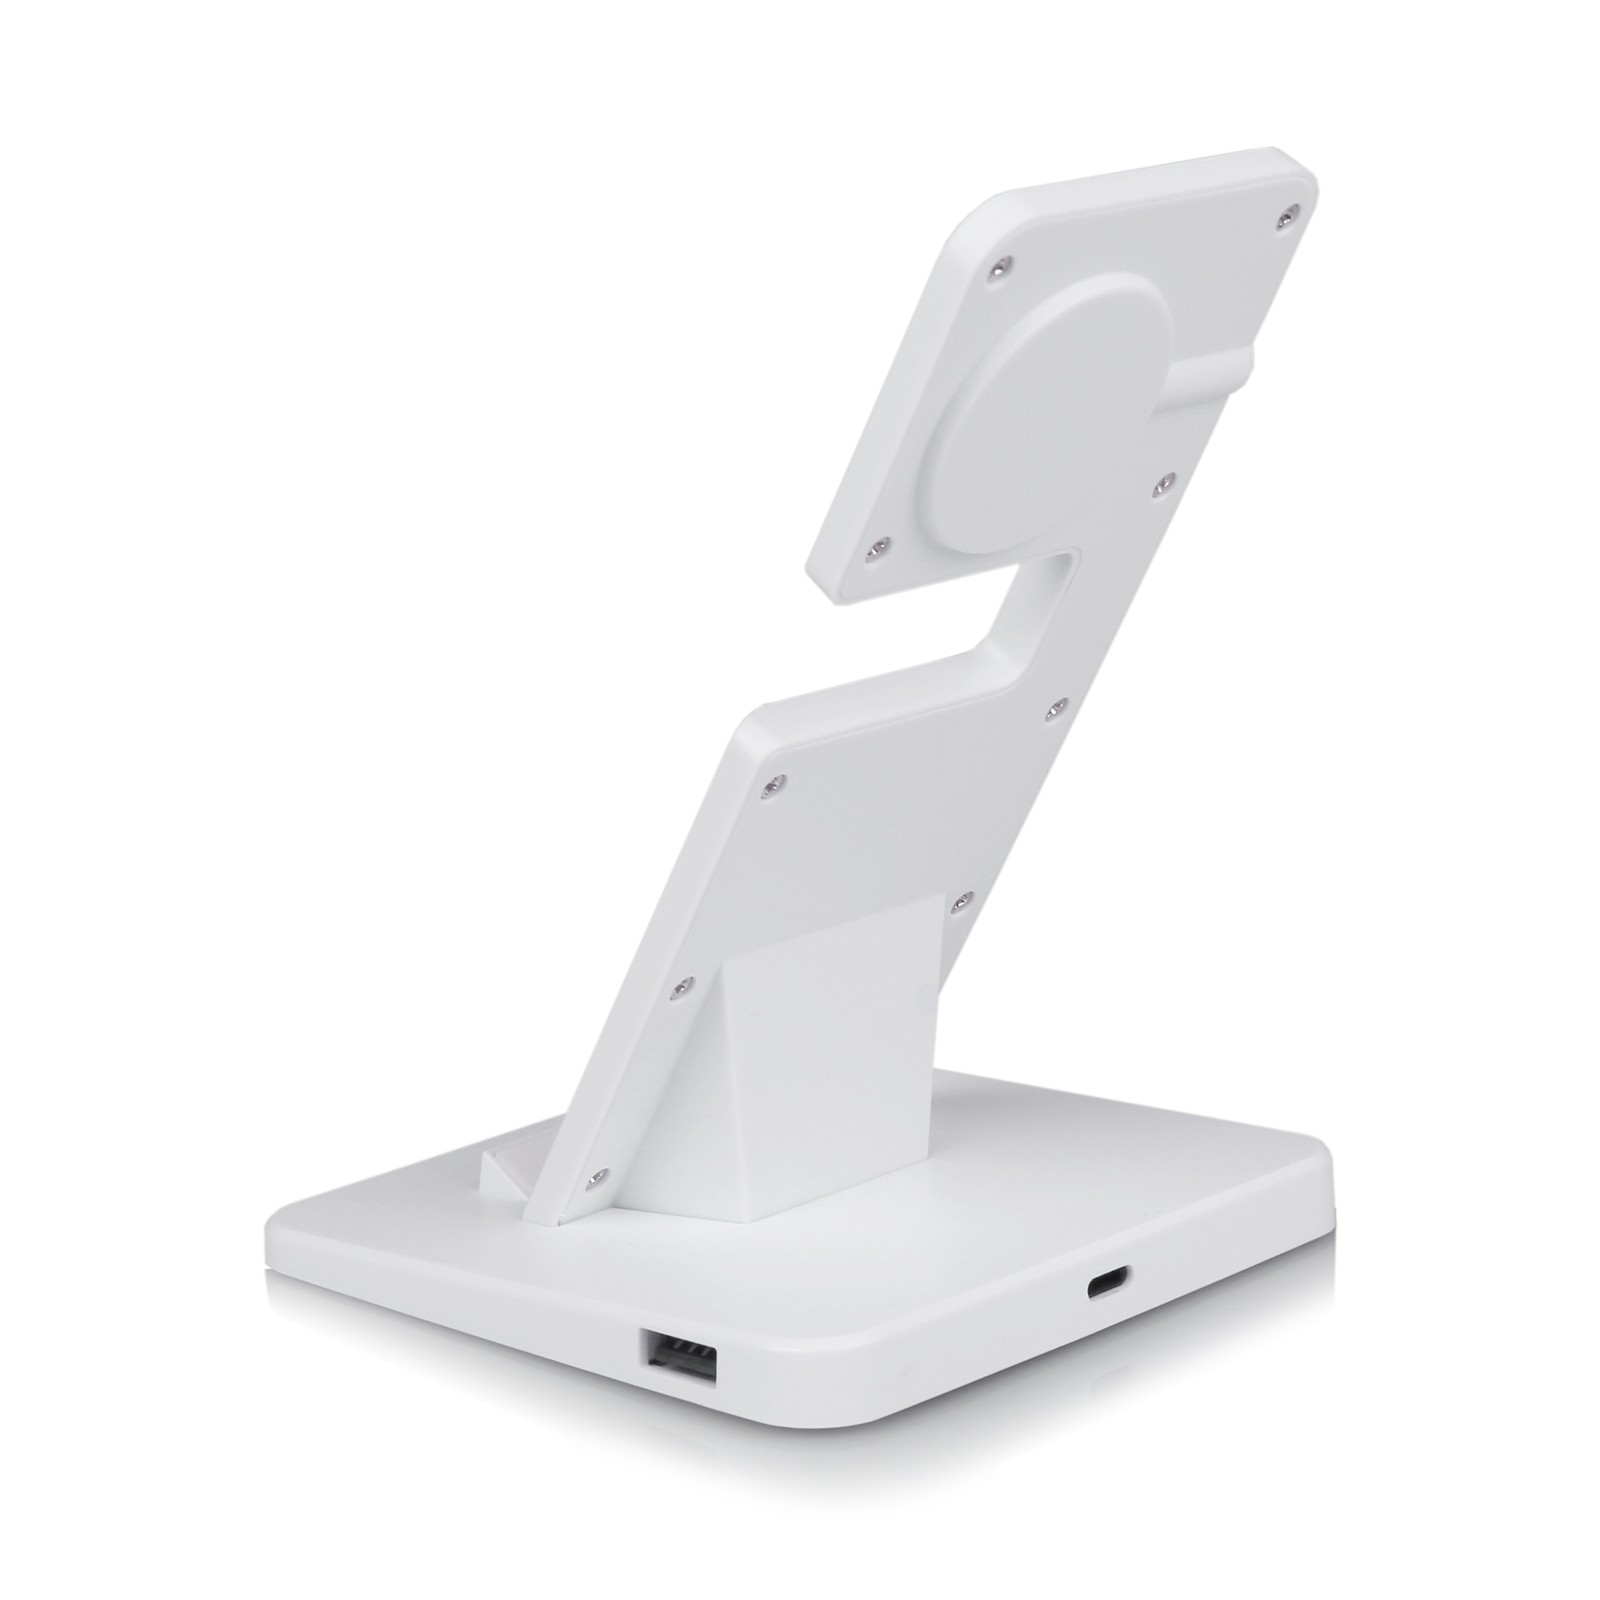 IN STOCK For Iphone Apple Watch USB Charging Dock Stand Holder Charger Desktop Station for iPhone 5 5s 6 Plus iPad